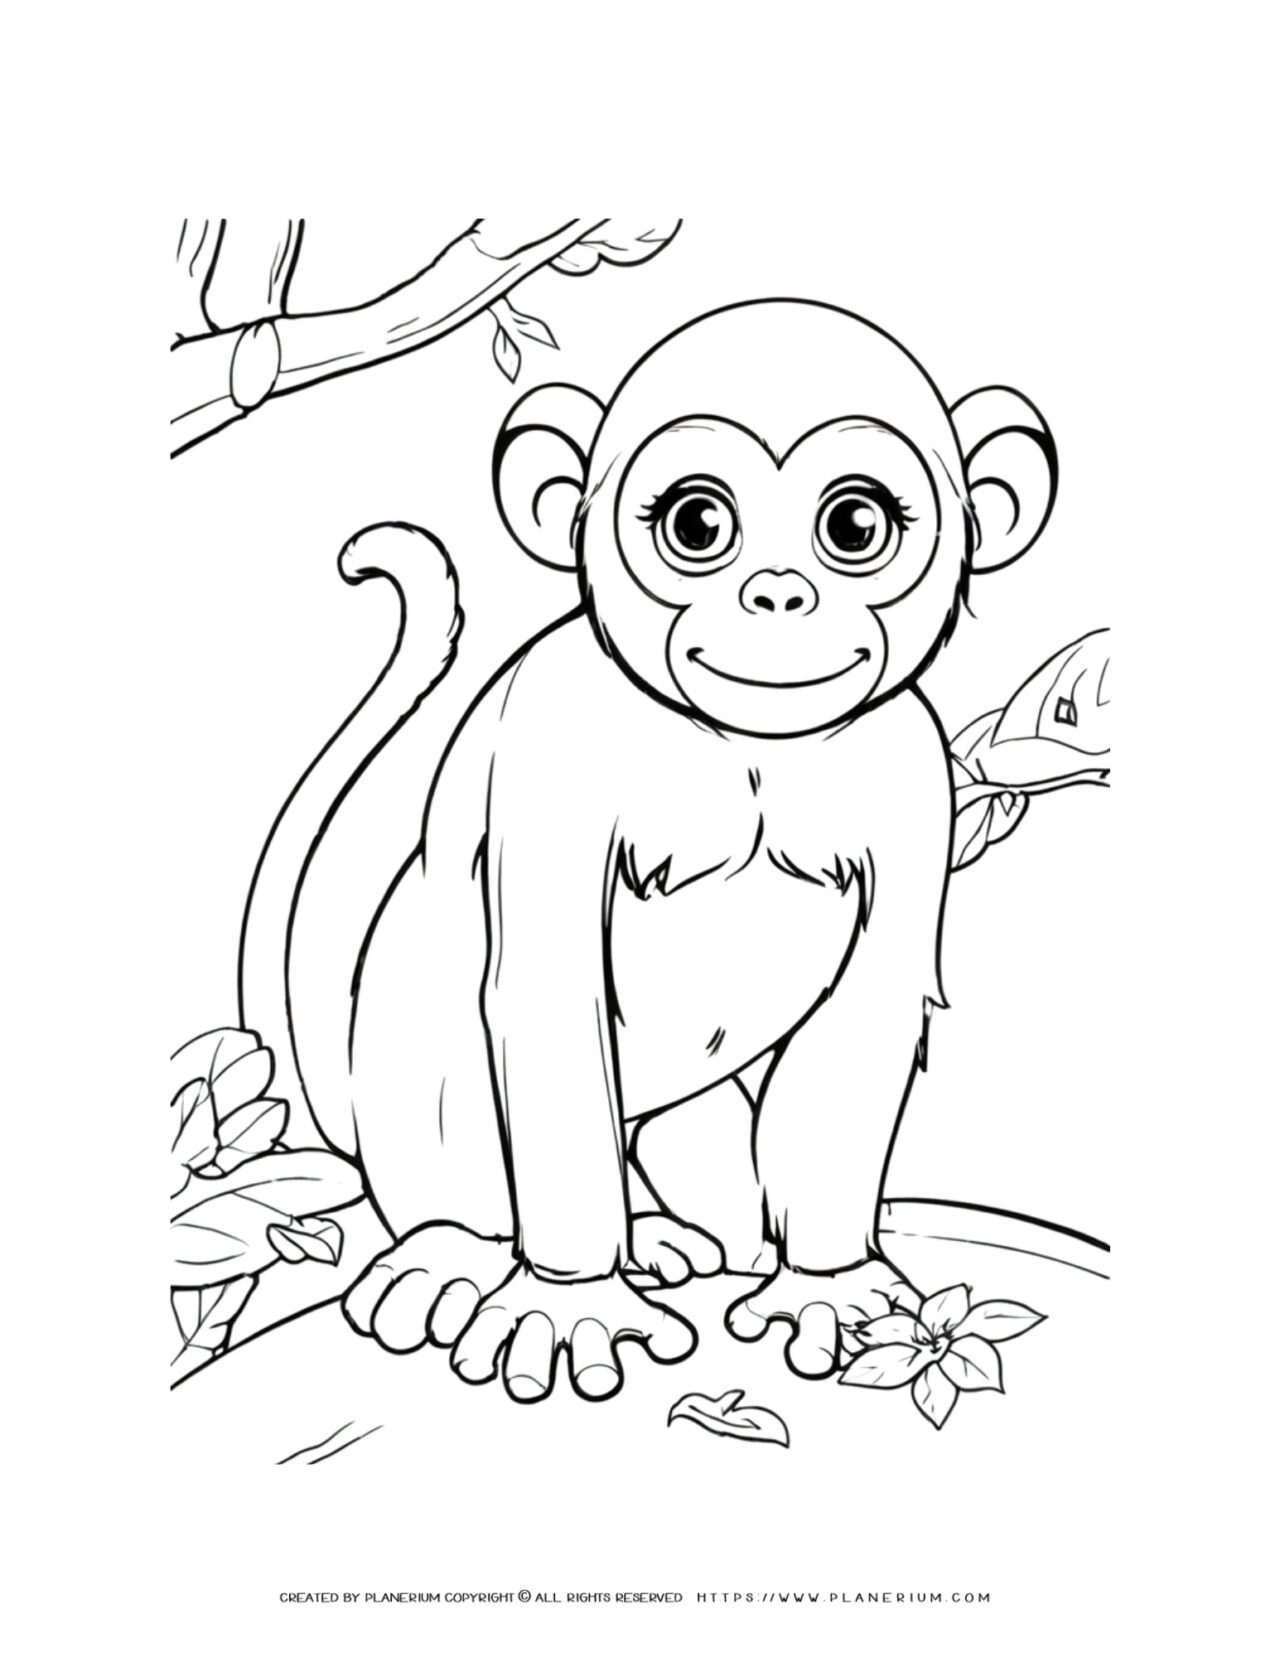 Cute-Monkey-Outline-Jungle-Coloring-Page